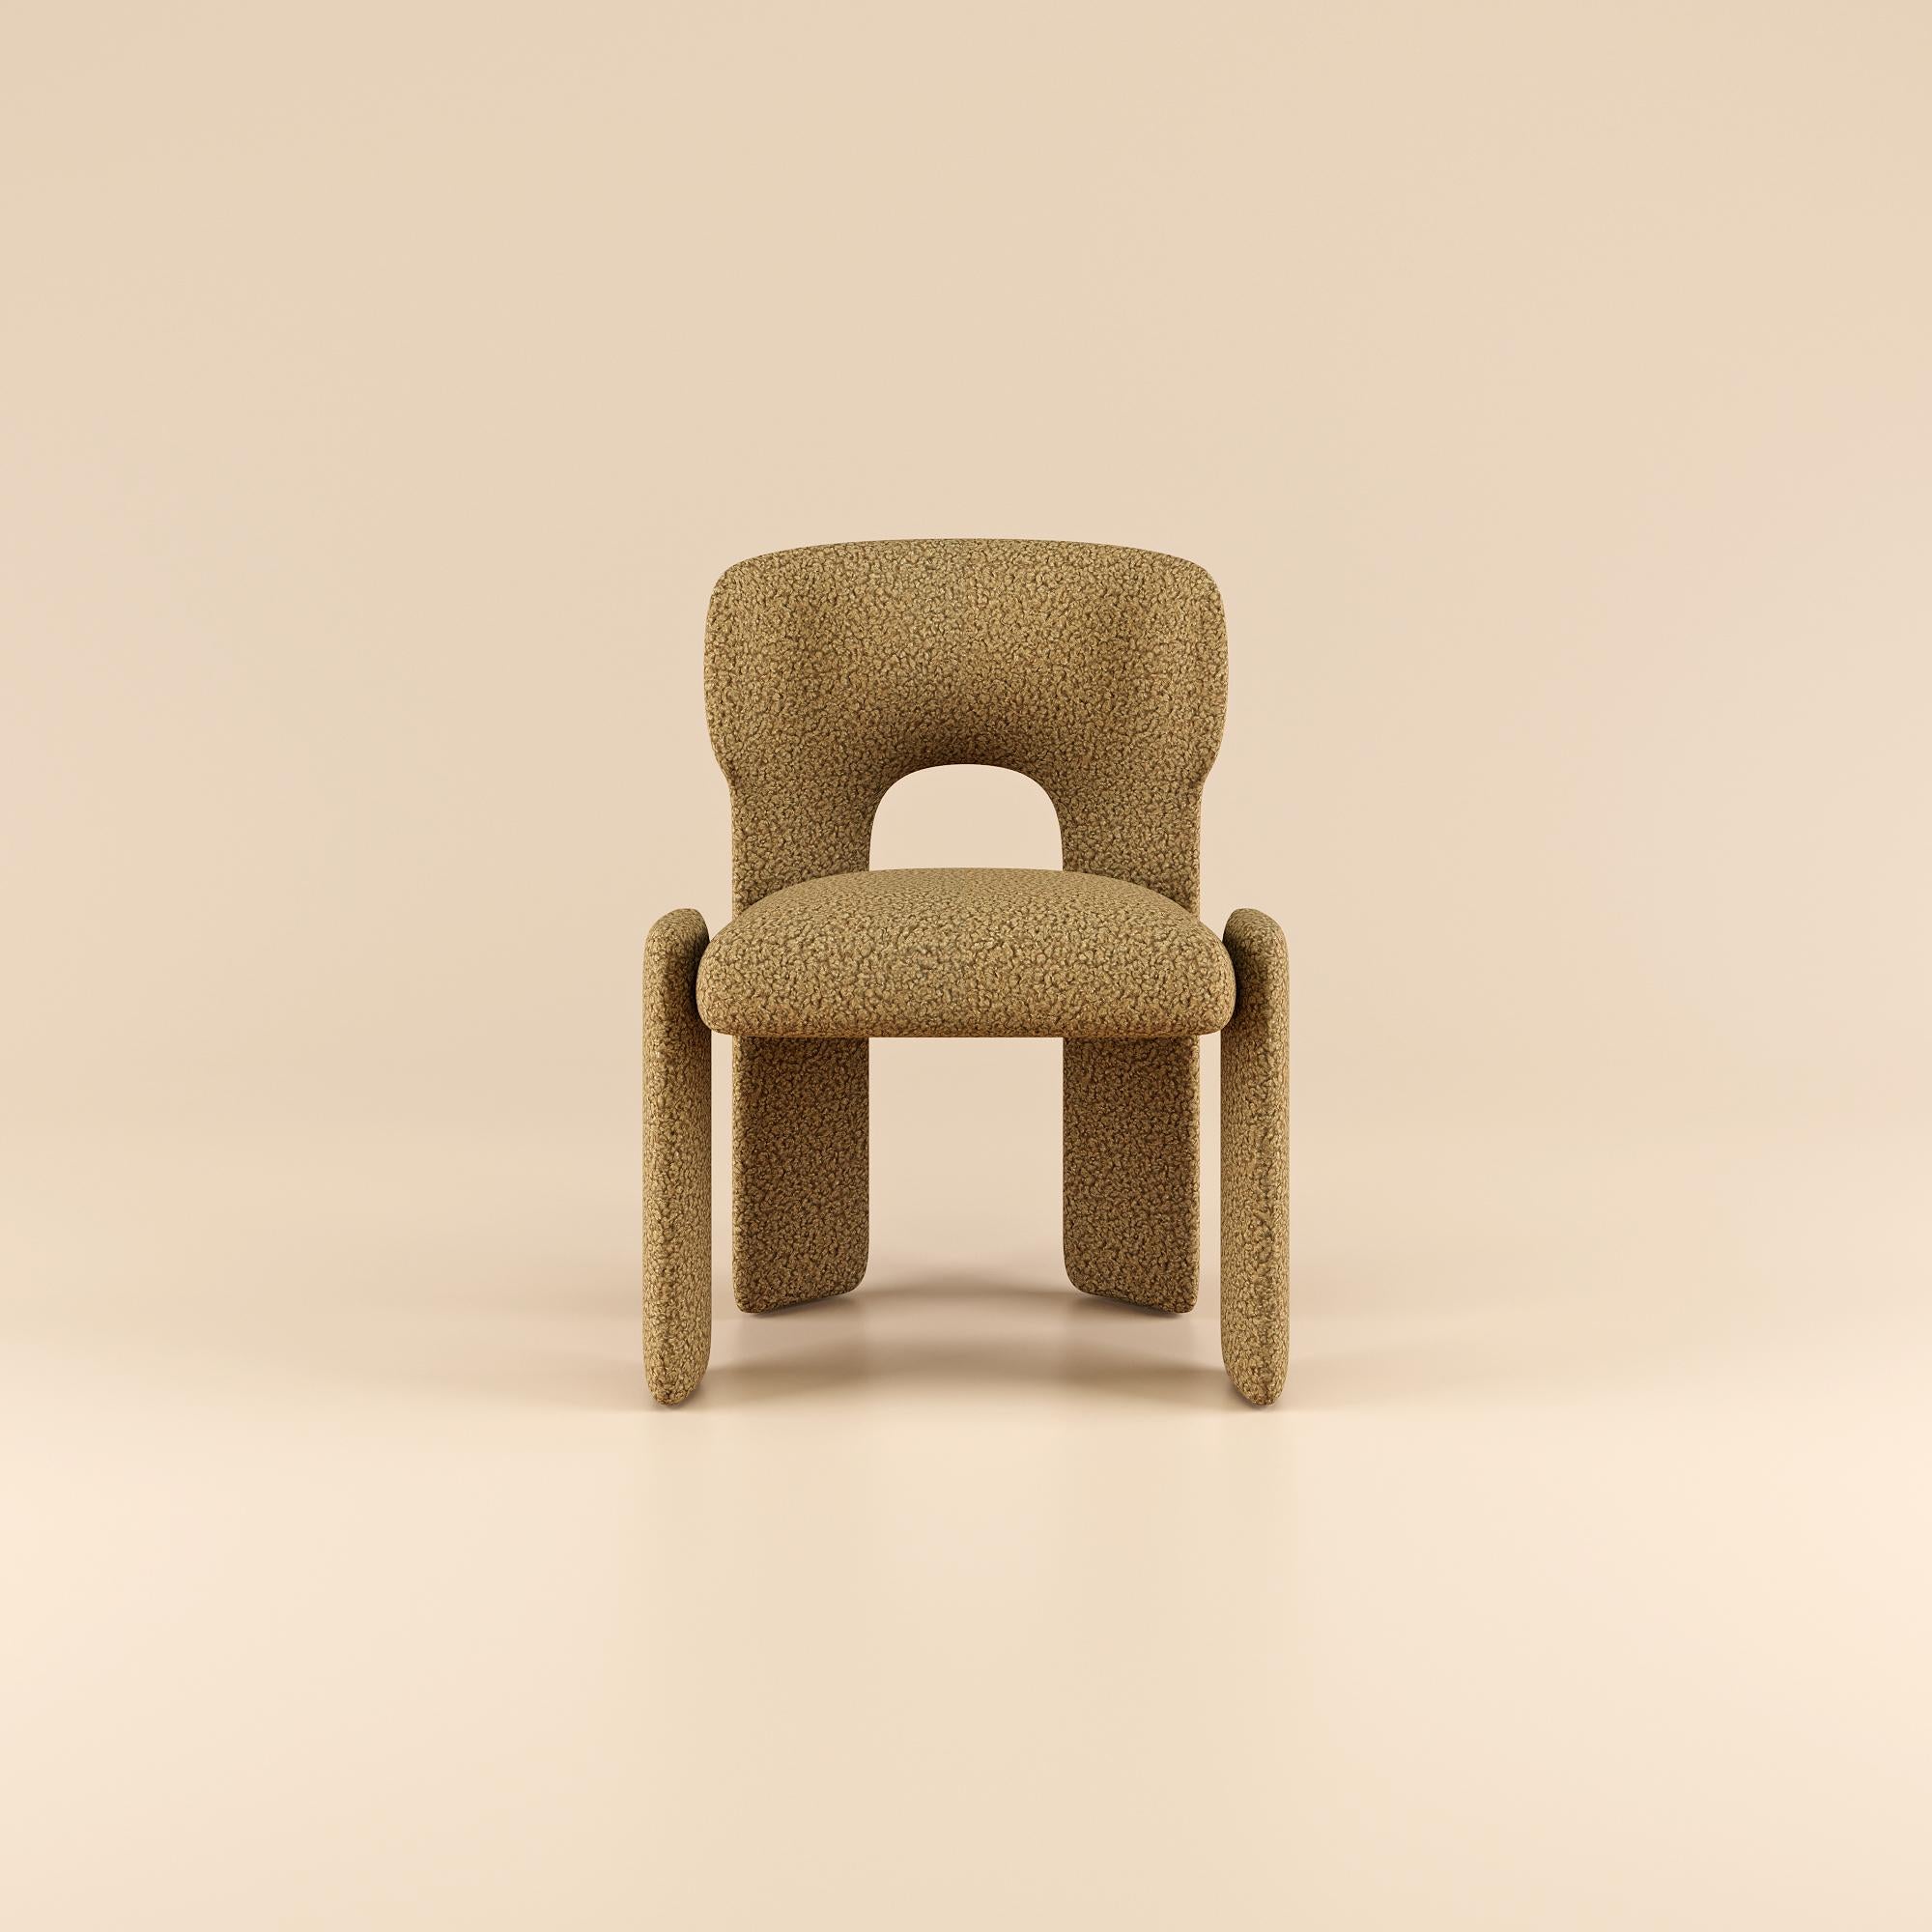 A testament to a new level of modern design, The Bold Dining Chair seamlessly blends form and function, elevating any dining experience with its refined elegance.

Decades of design expertise bring the perfect balance of comfort, aesthetics, and